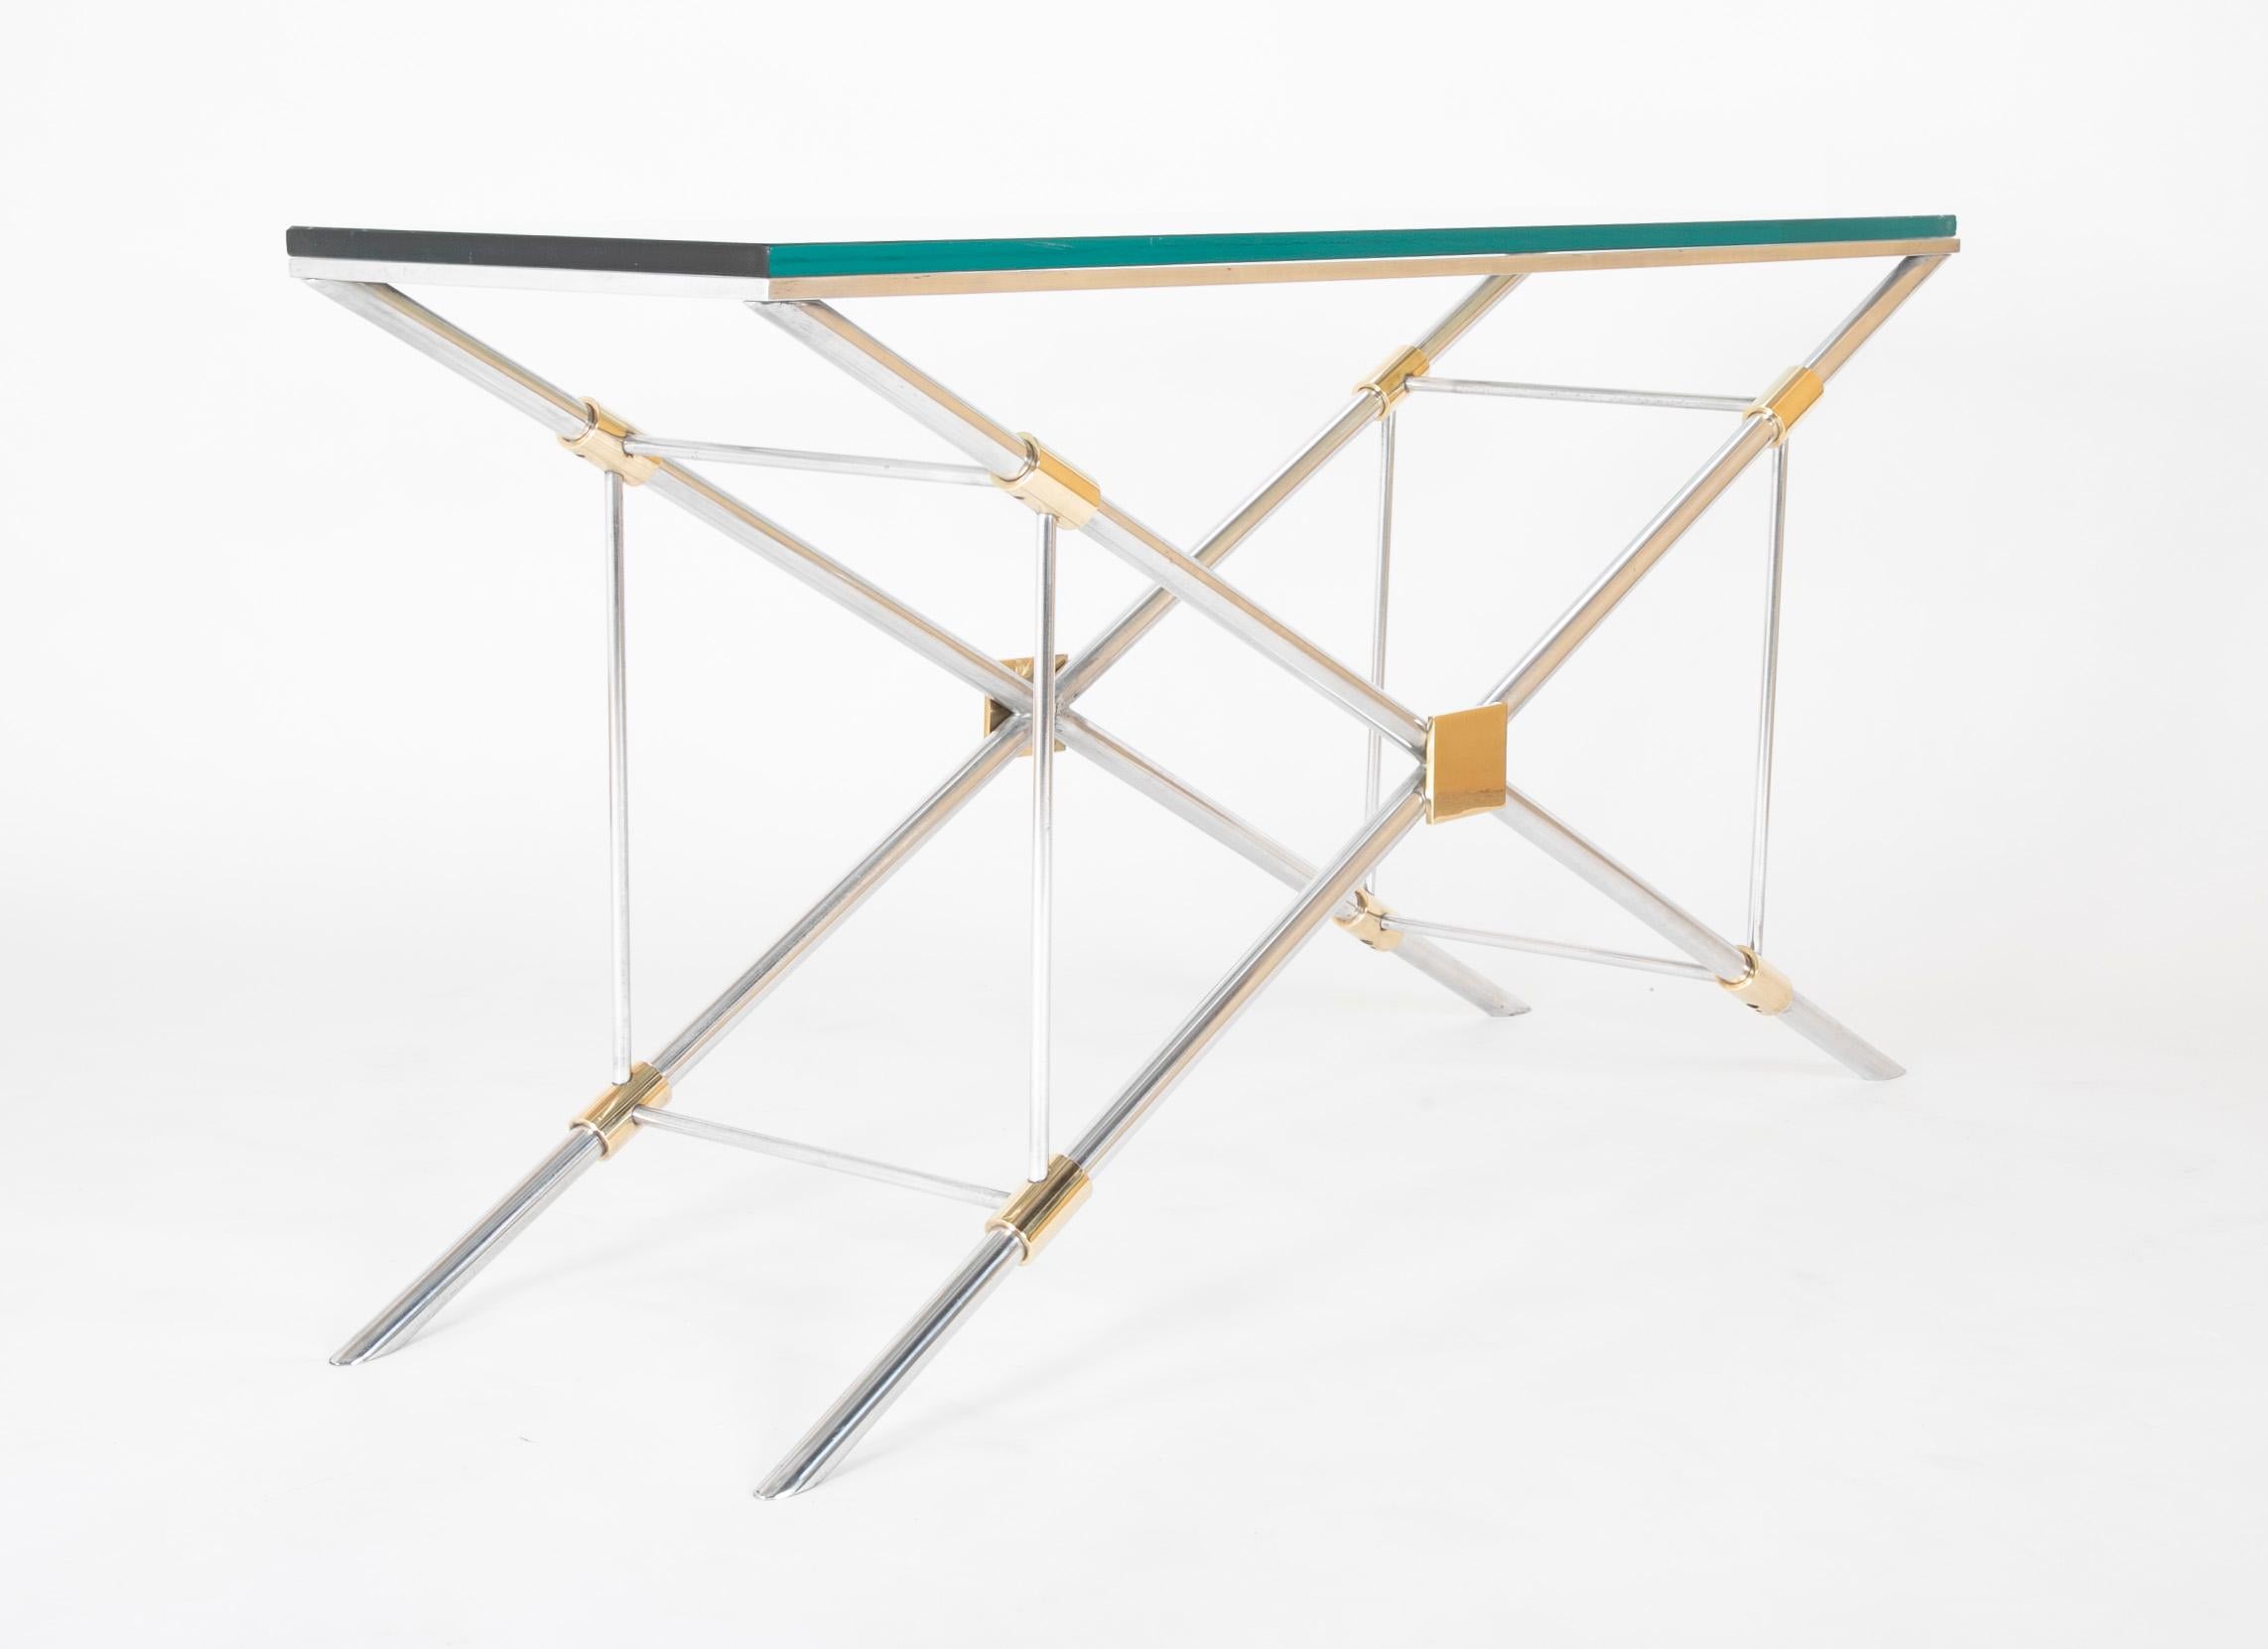 A John Vesey console table of aluminium, glass and brass. Mid-20th century.